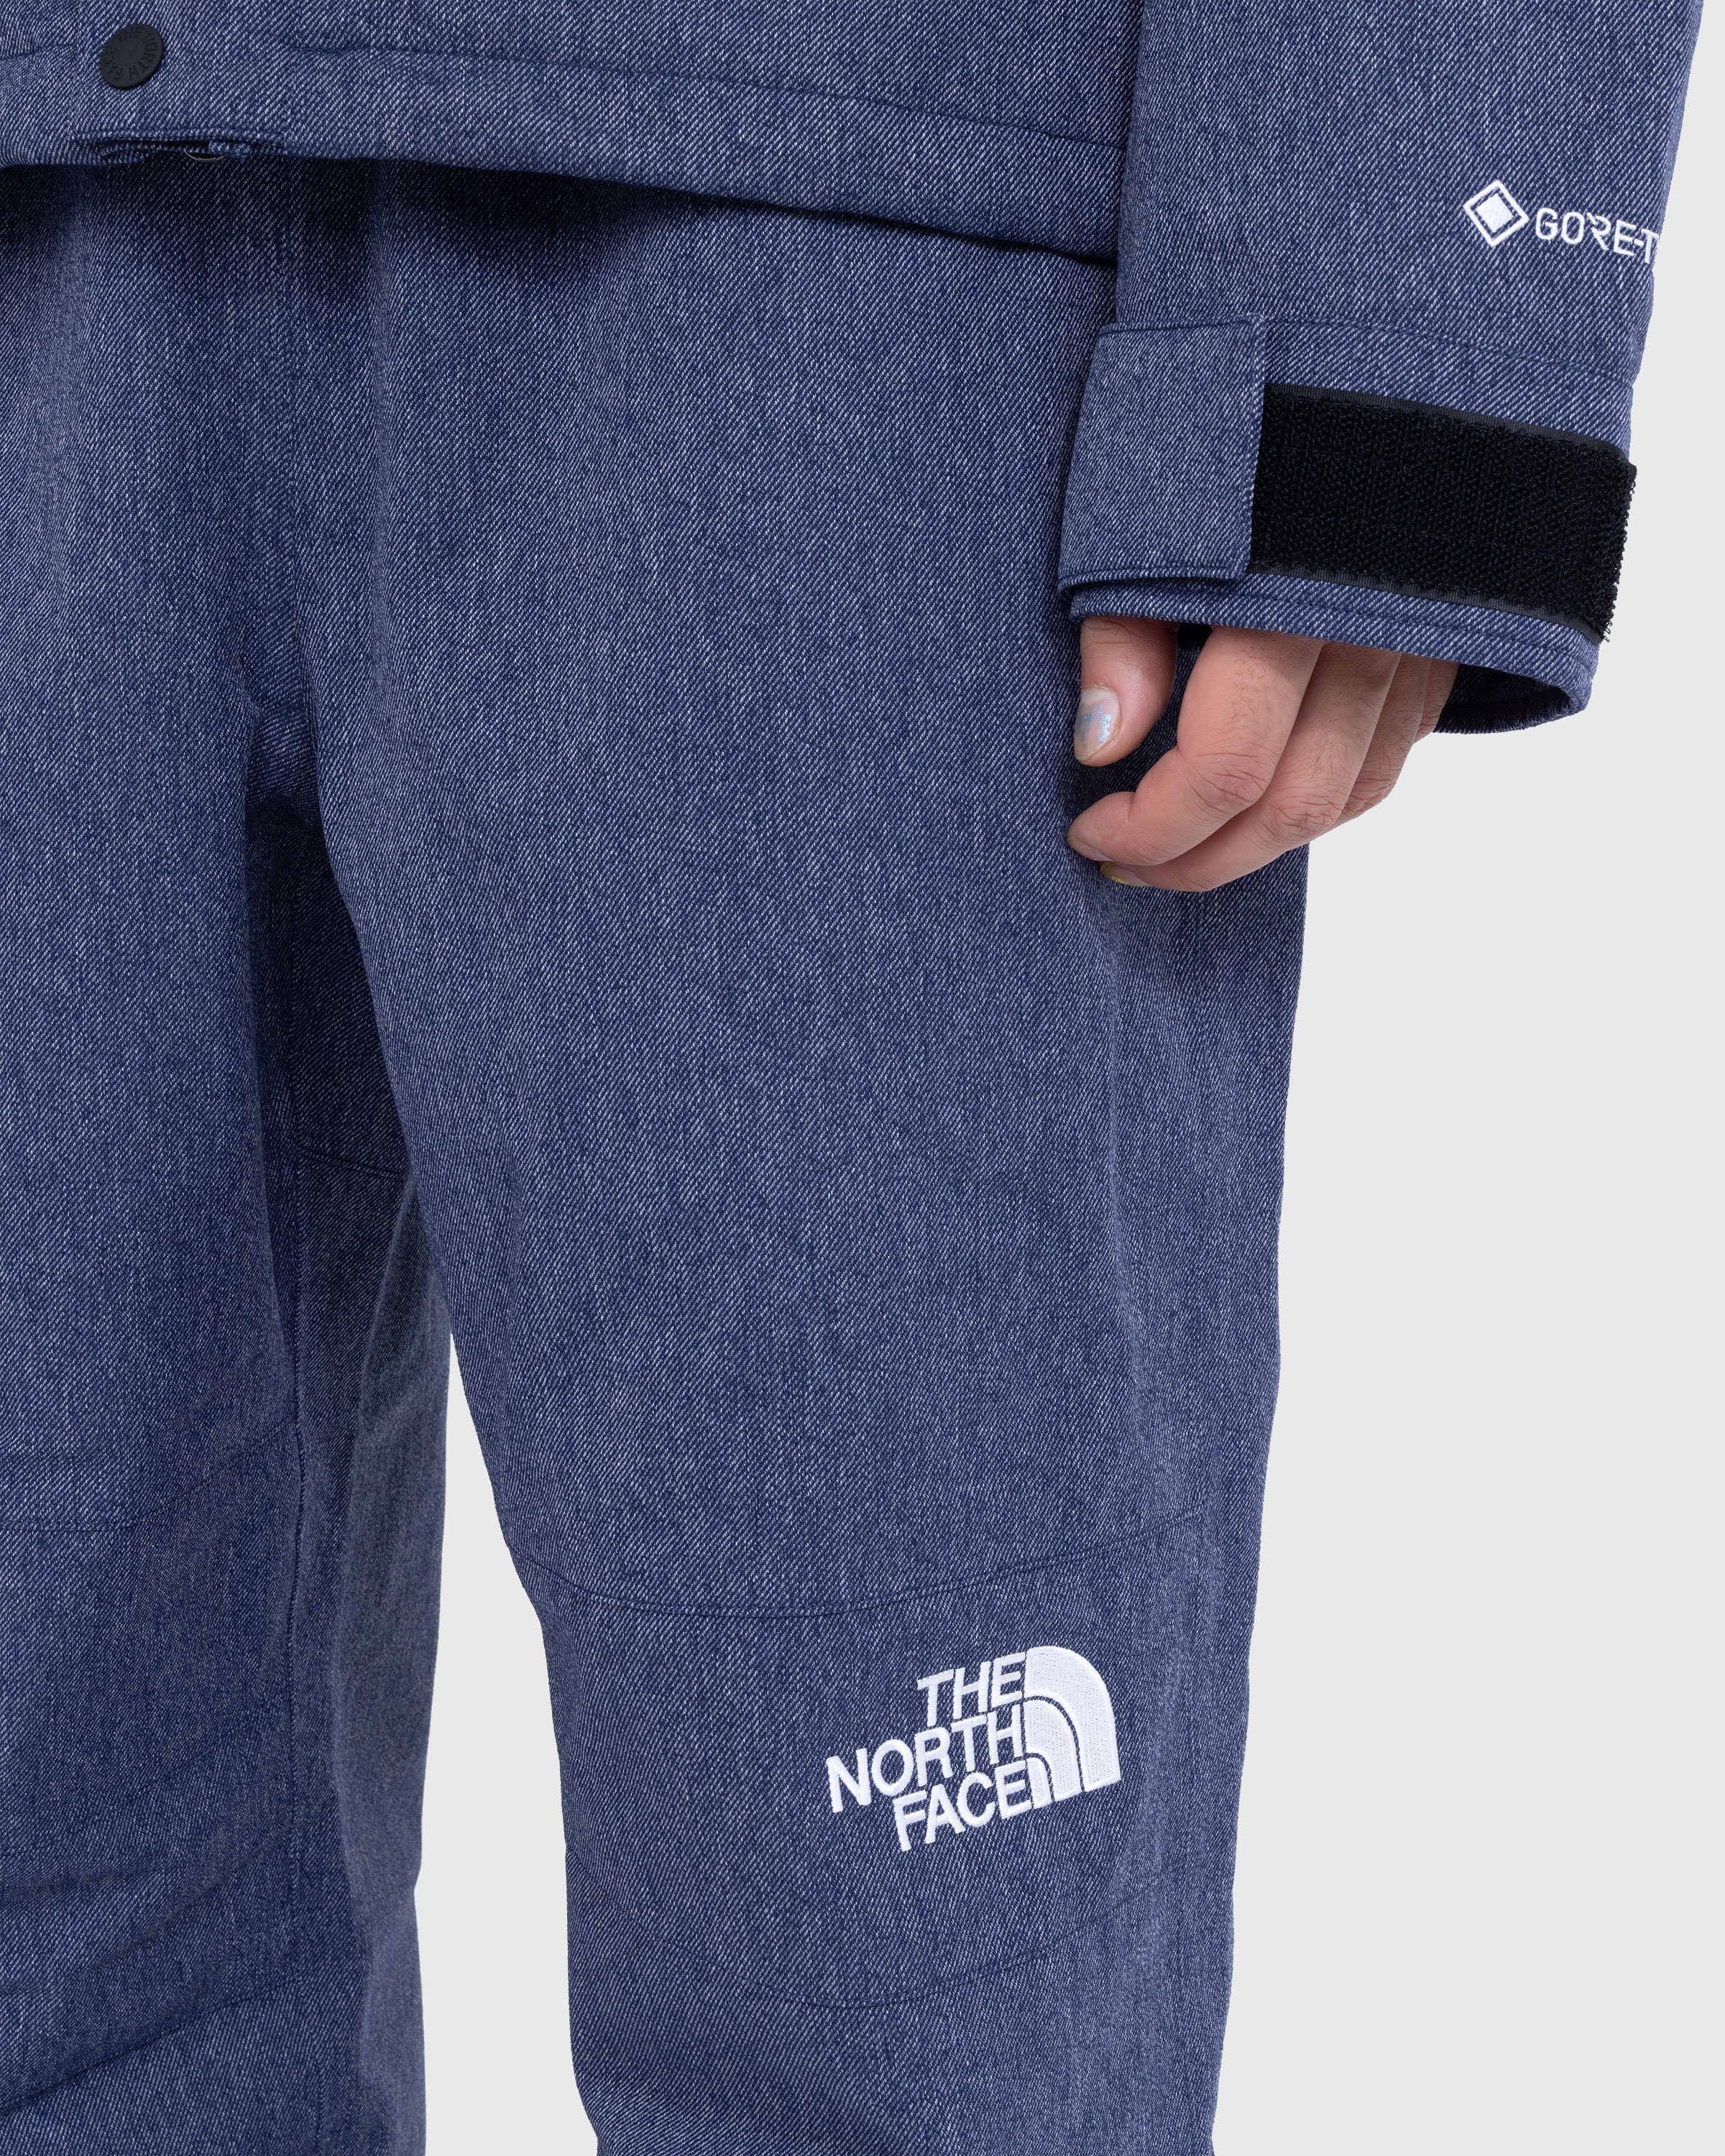 The North Face - Gore-Tex Mountain Pant Blue - Clothing - Blue - Image 5